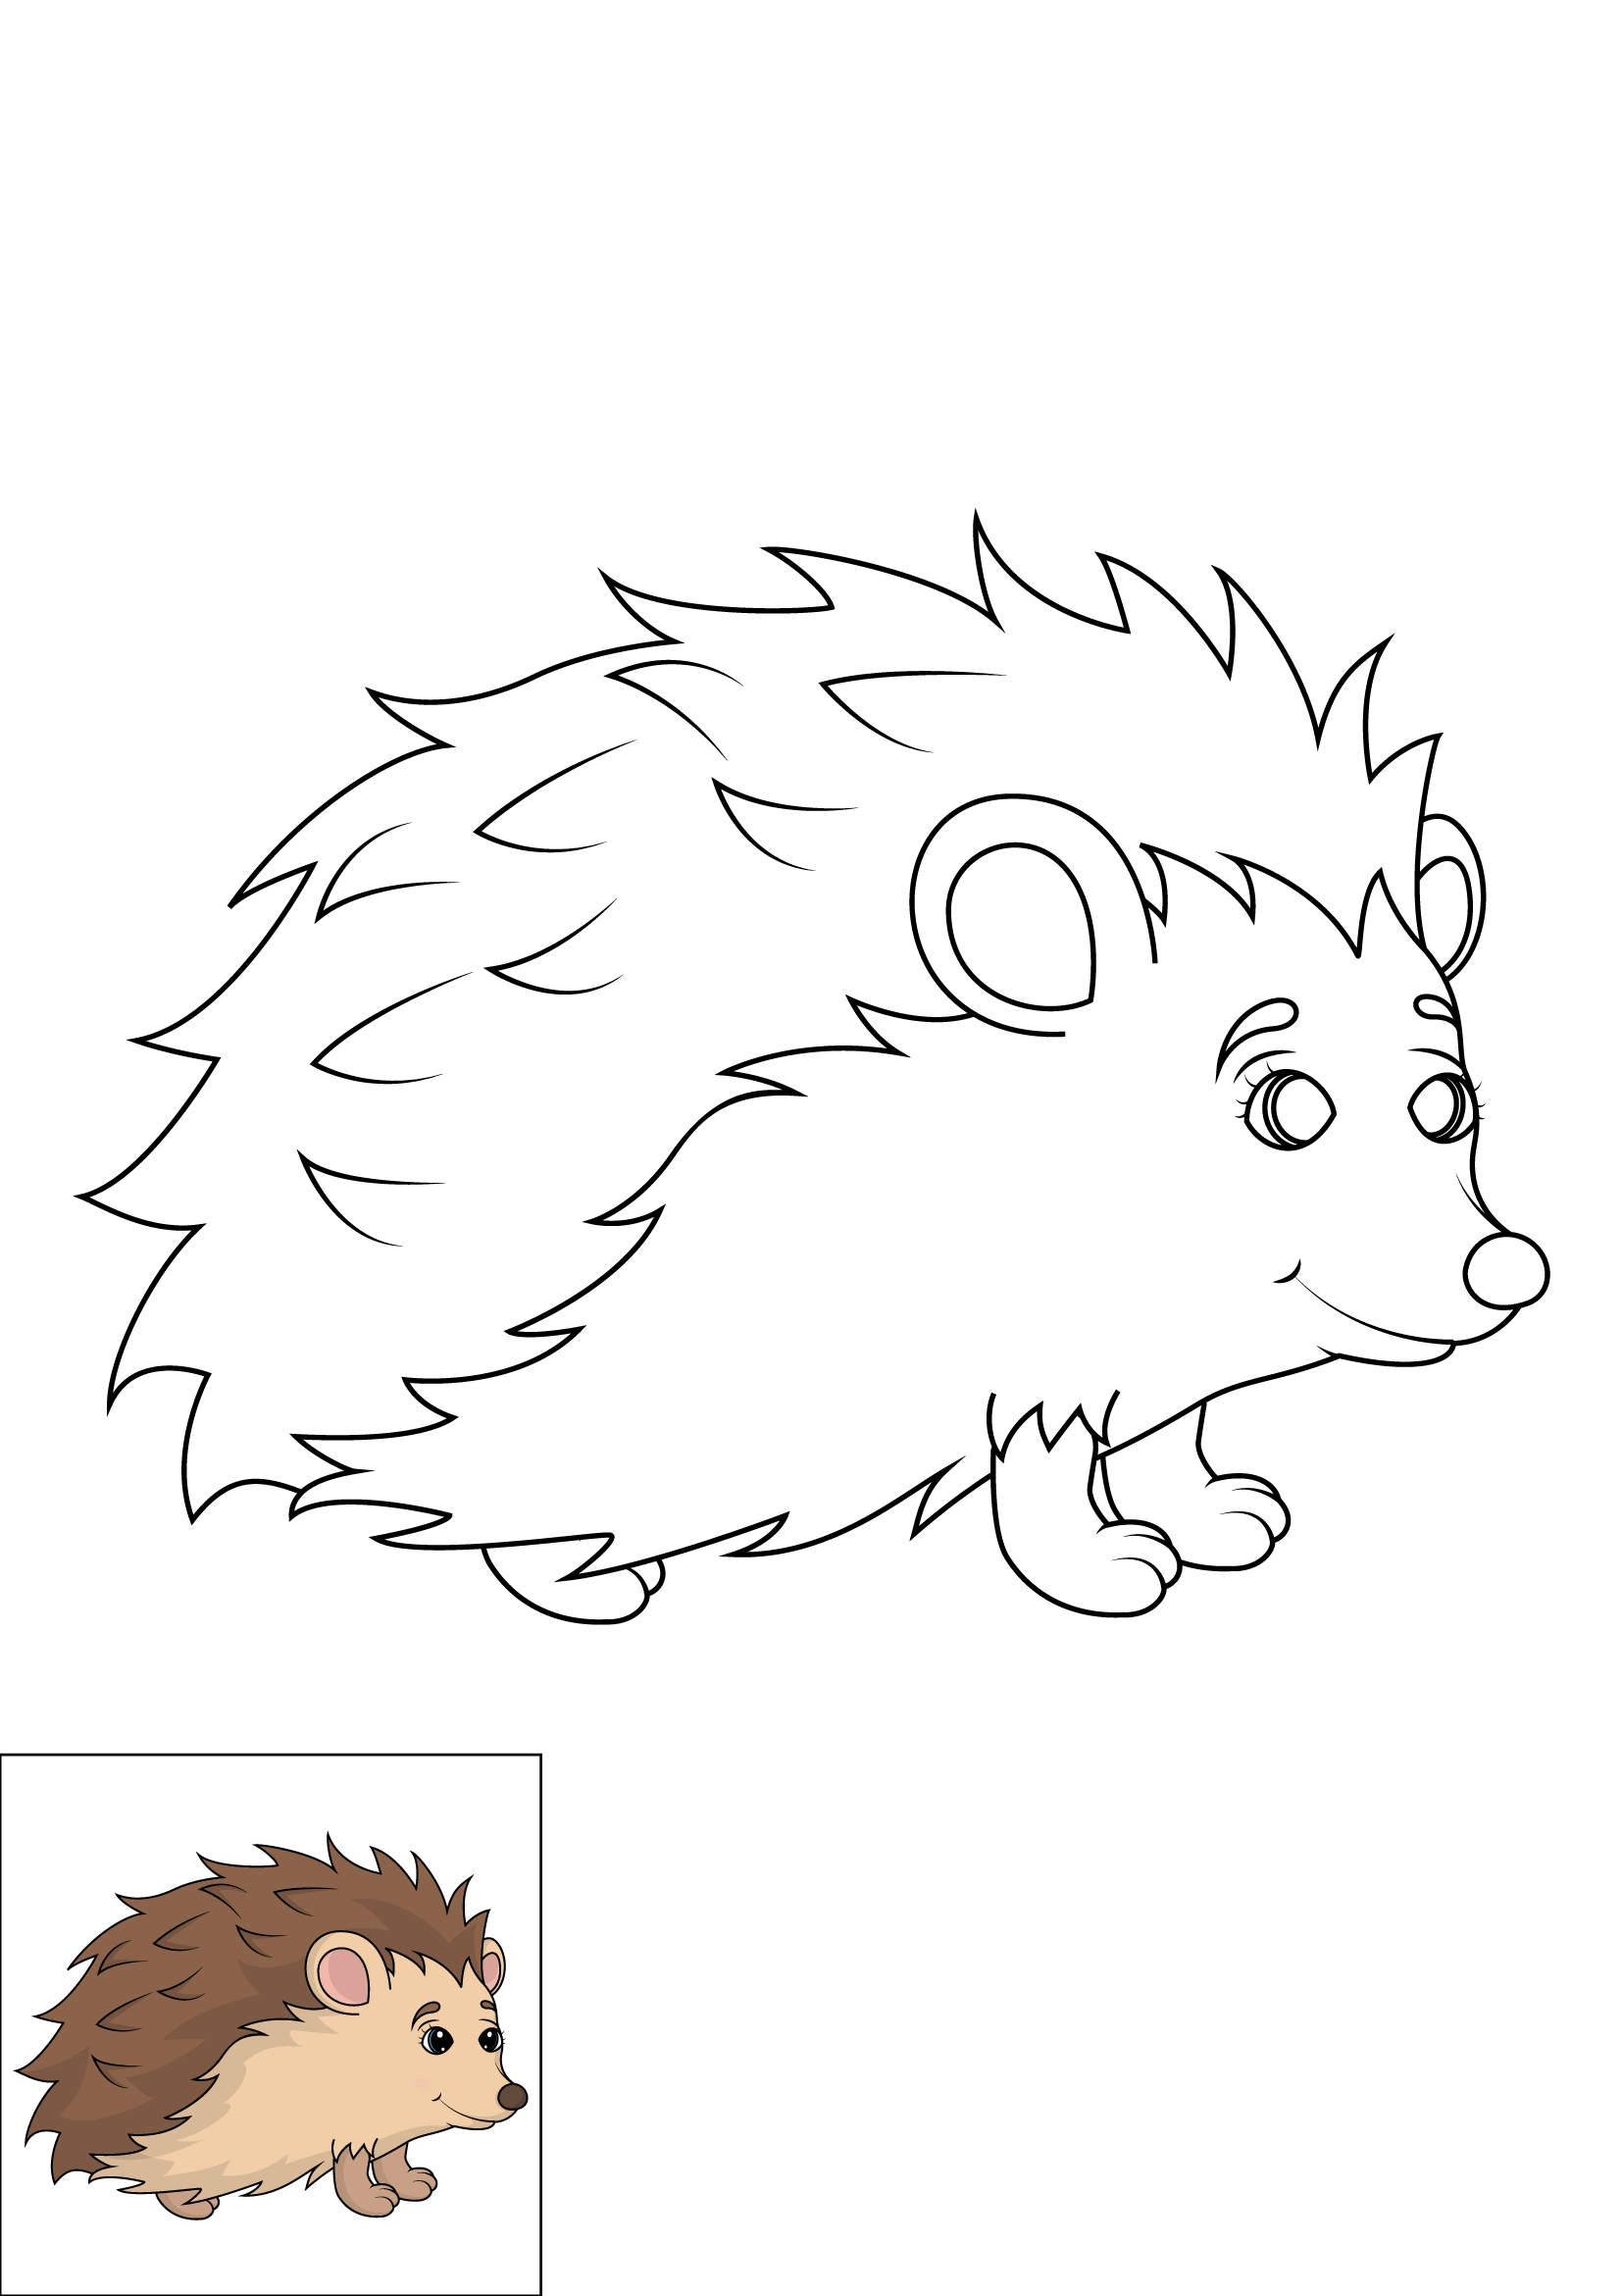 How to Draw A Hedgehog Step by Step Printable Color